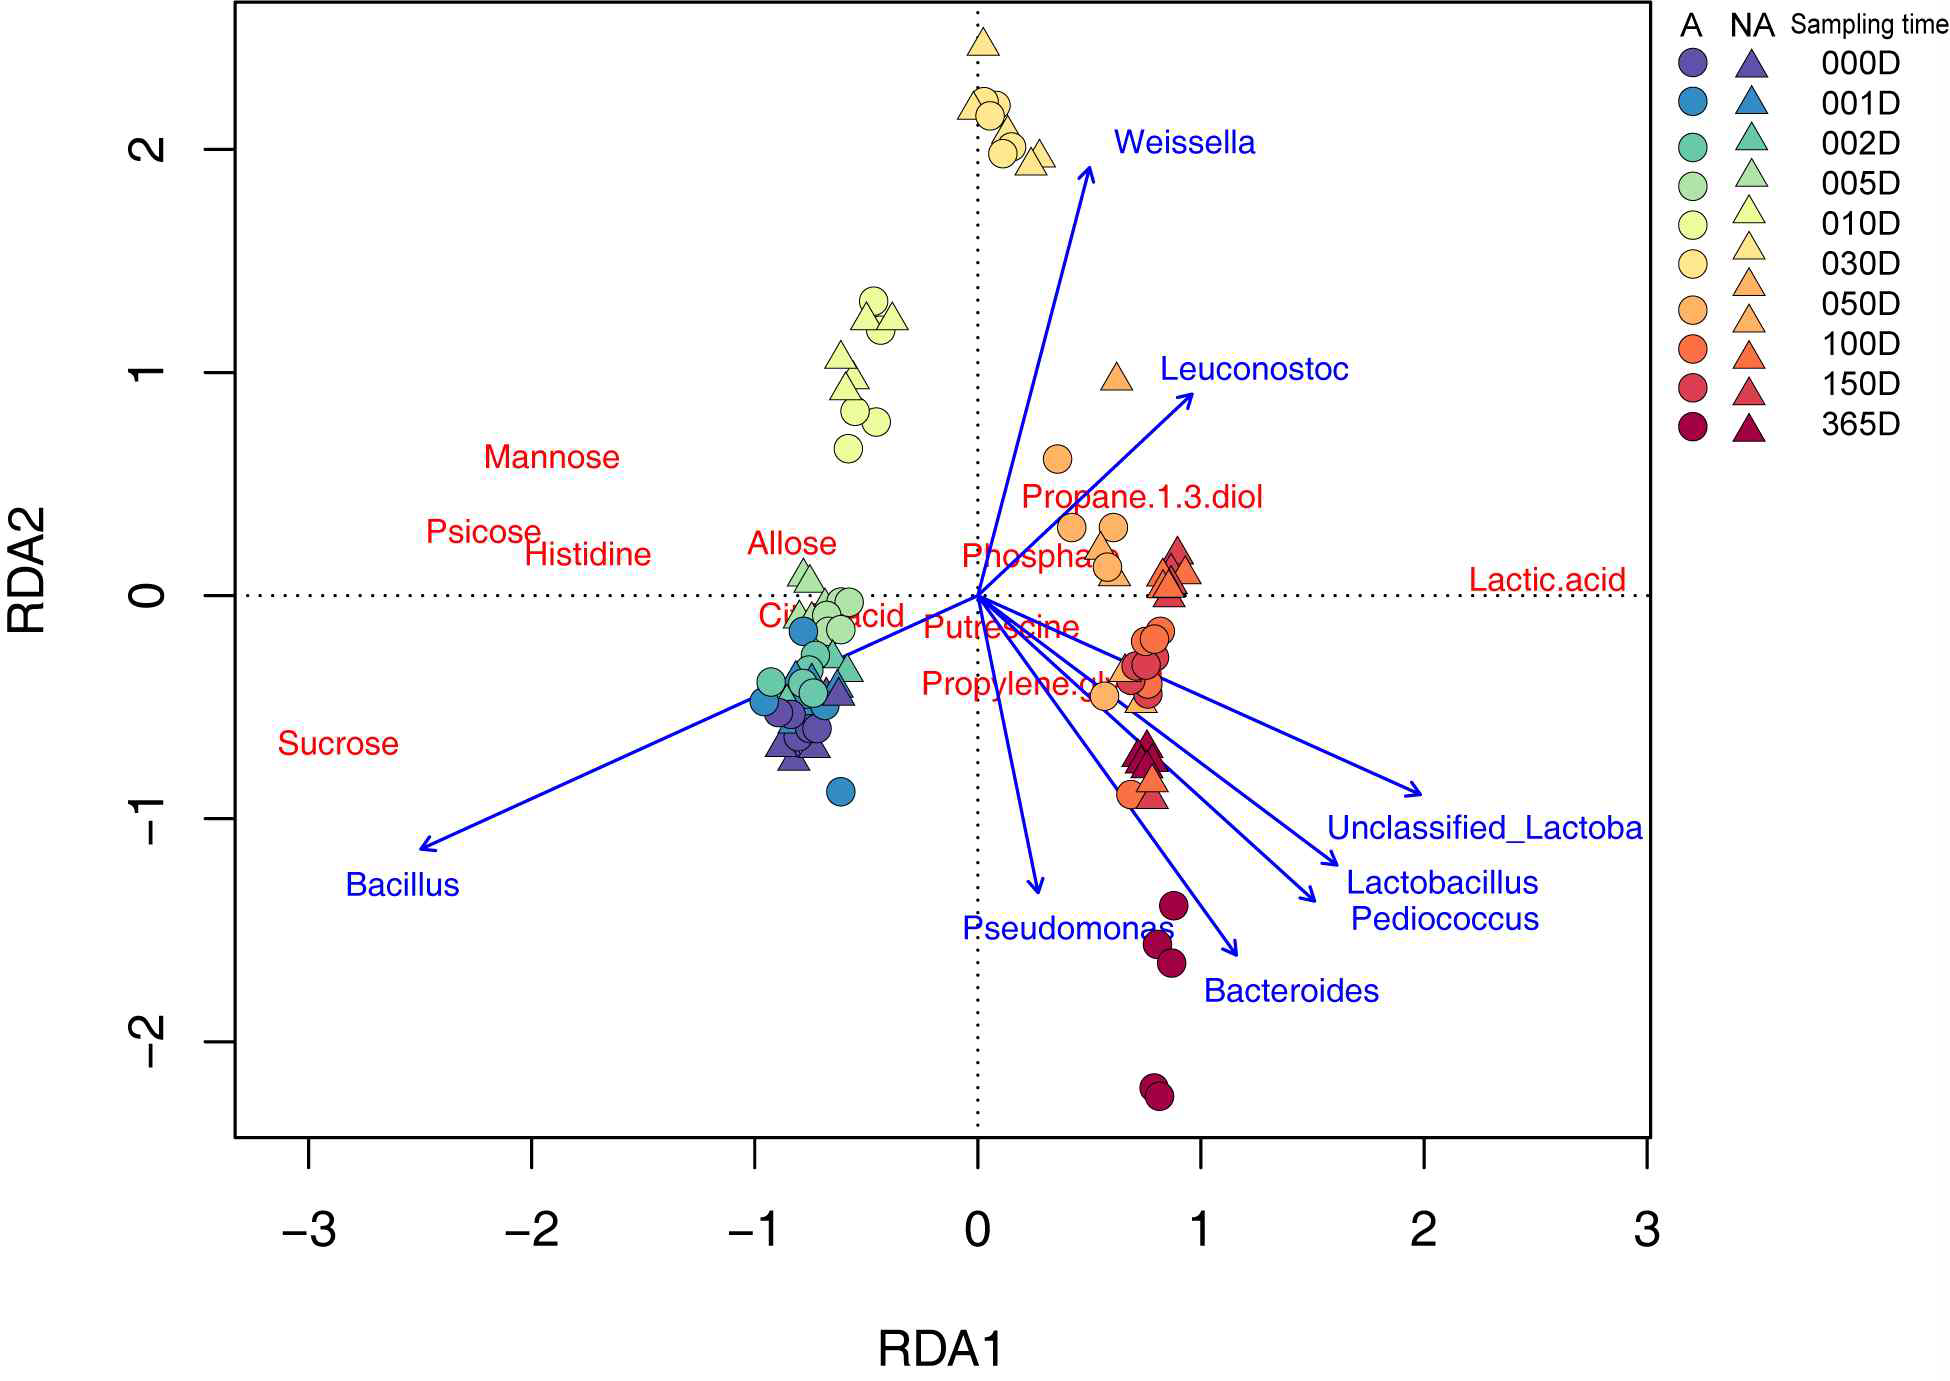 RDA tri-plot of metabolites and microorganisms in kimchi according to fermentation